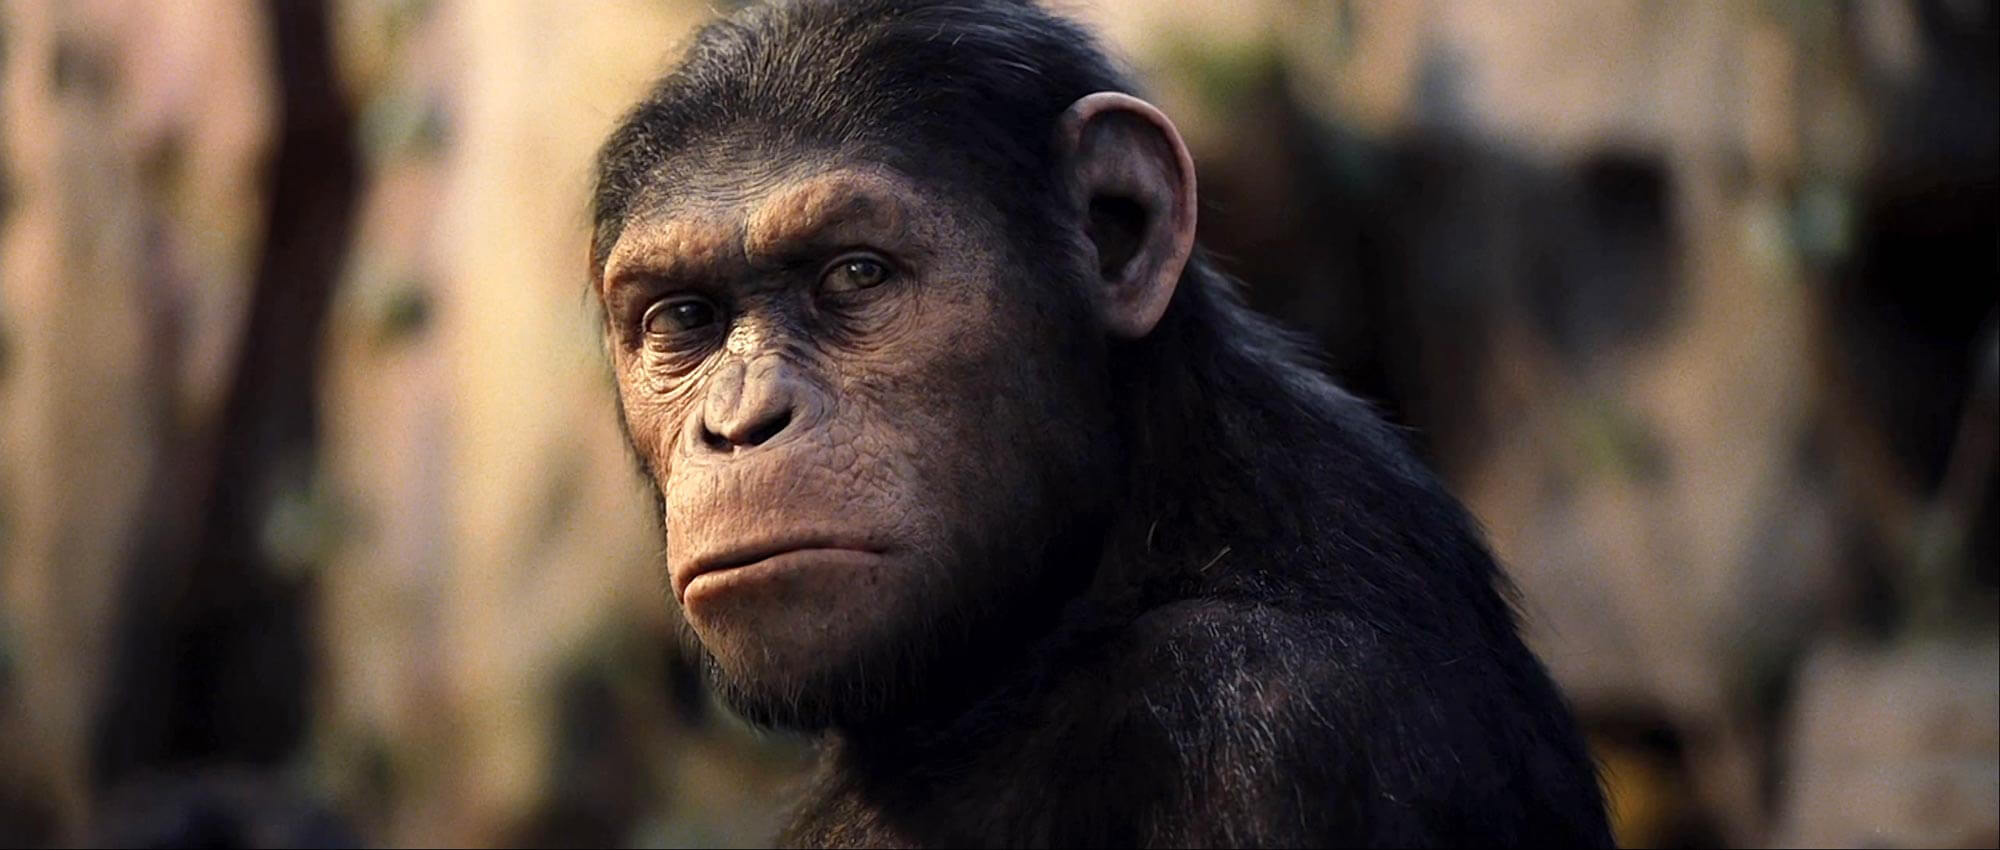 how long is rise of the planet of the apes